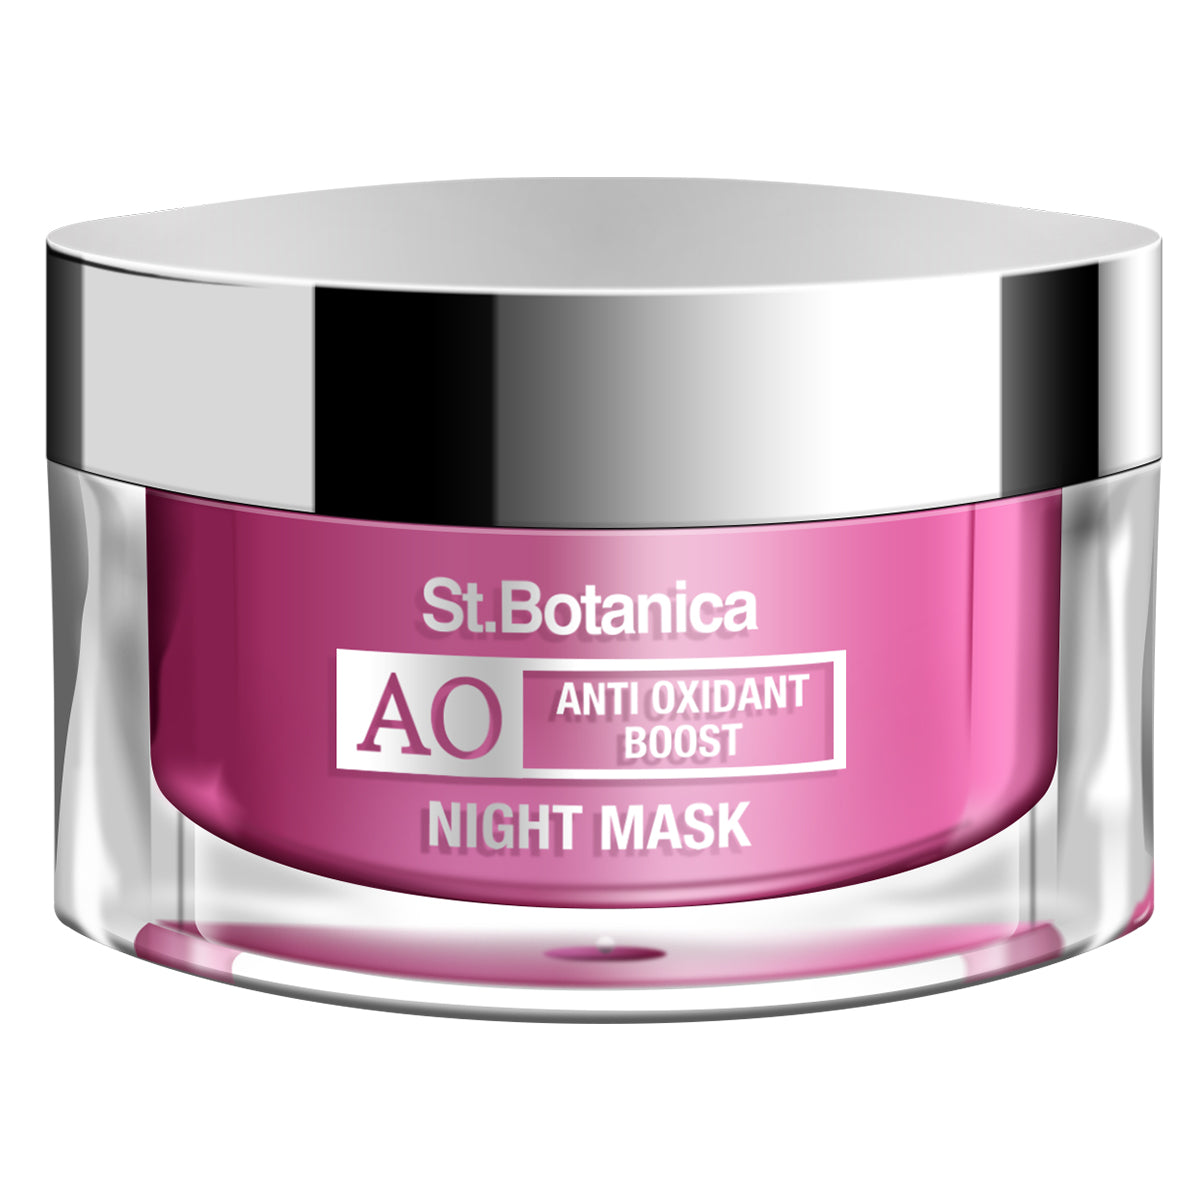 St.Botanica Anti Oxidant Boost Over Night Mask - For Clear & Radiant Skin (Night Cream + Overnight Mask), 50 g (STBOT550)